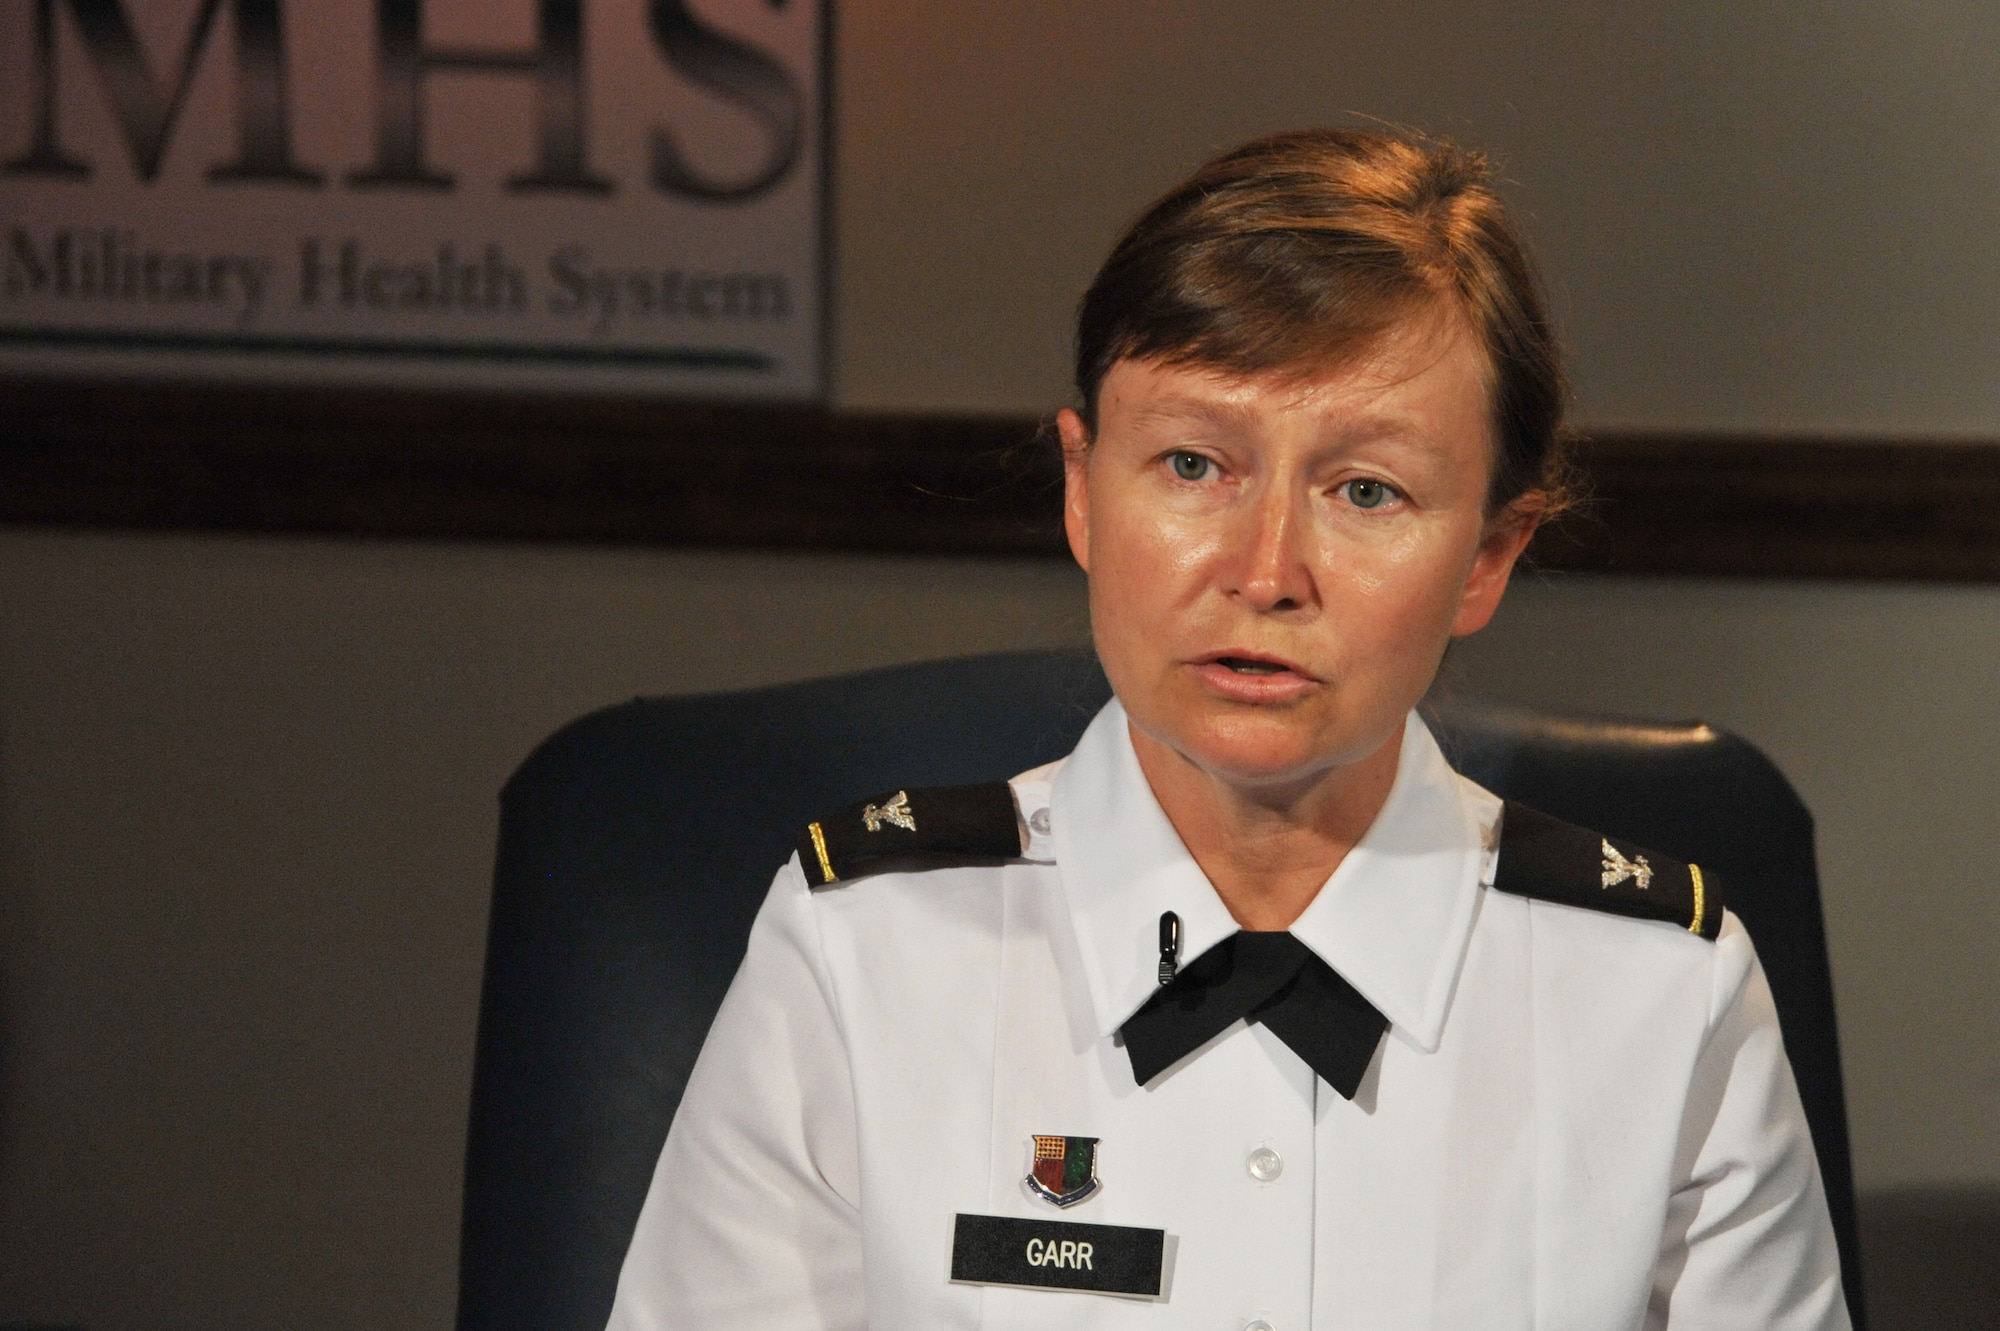 Army Col. Mary Garr explains the process of achieving the San Antonio Military Health System as being a benchmark DOD success story during an interview at Wilford Hall Ambulatory Surgical Center, San Antonio, Texas, July 9, 2012. (U.S. Air Force photo/Desiree N. Palacios)